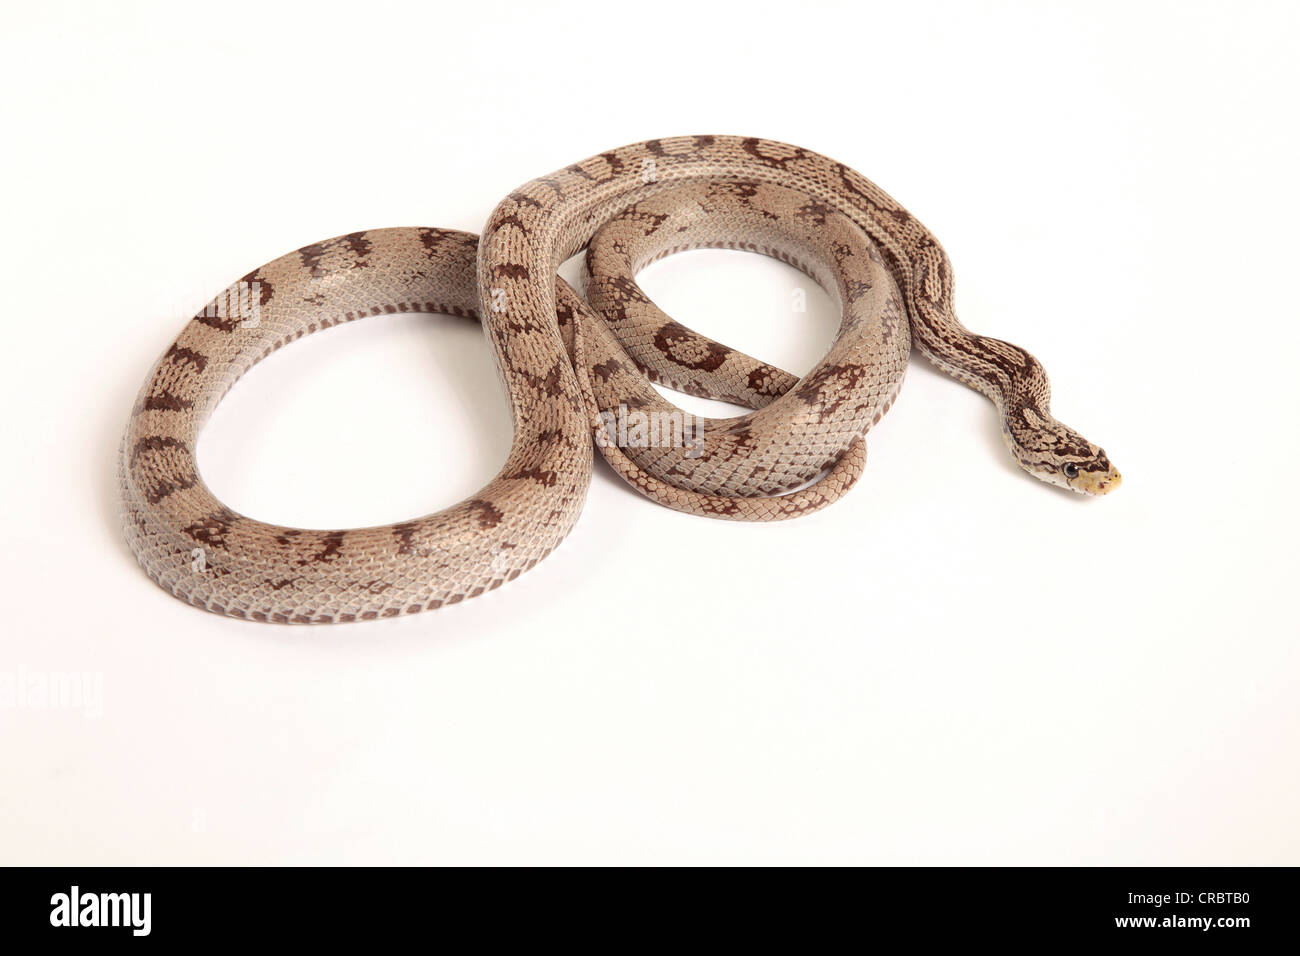 Cornsnake on a cut out white background Stock Photo